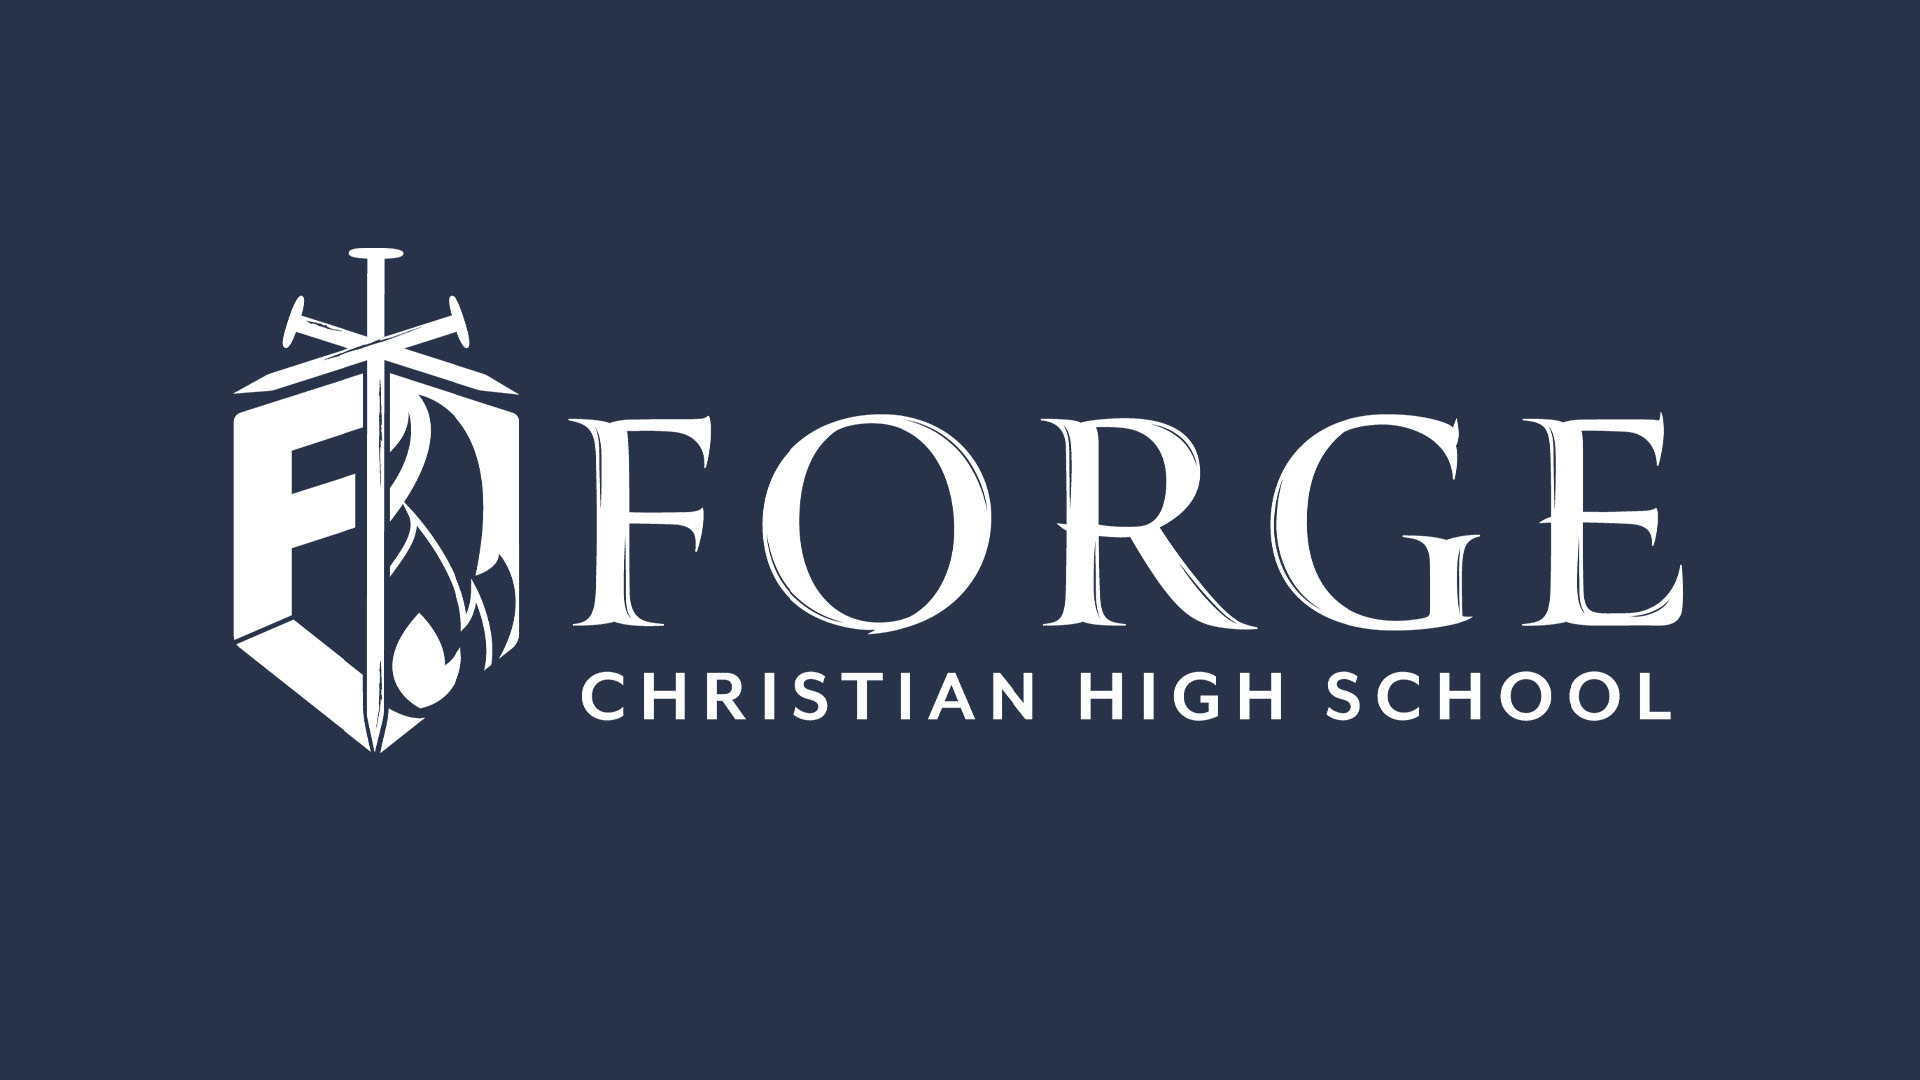 Forge Christian High School

Enrollment Now Available
